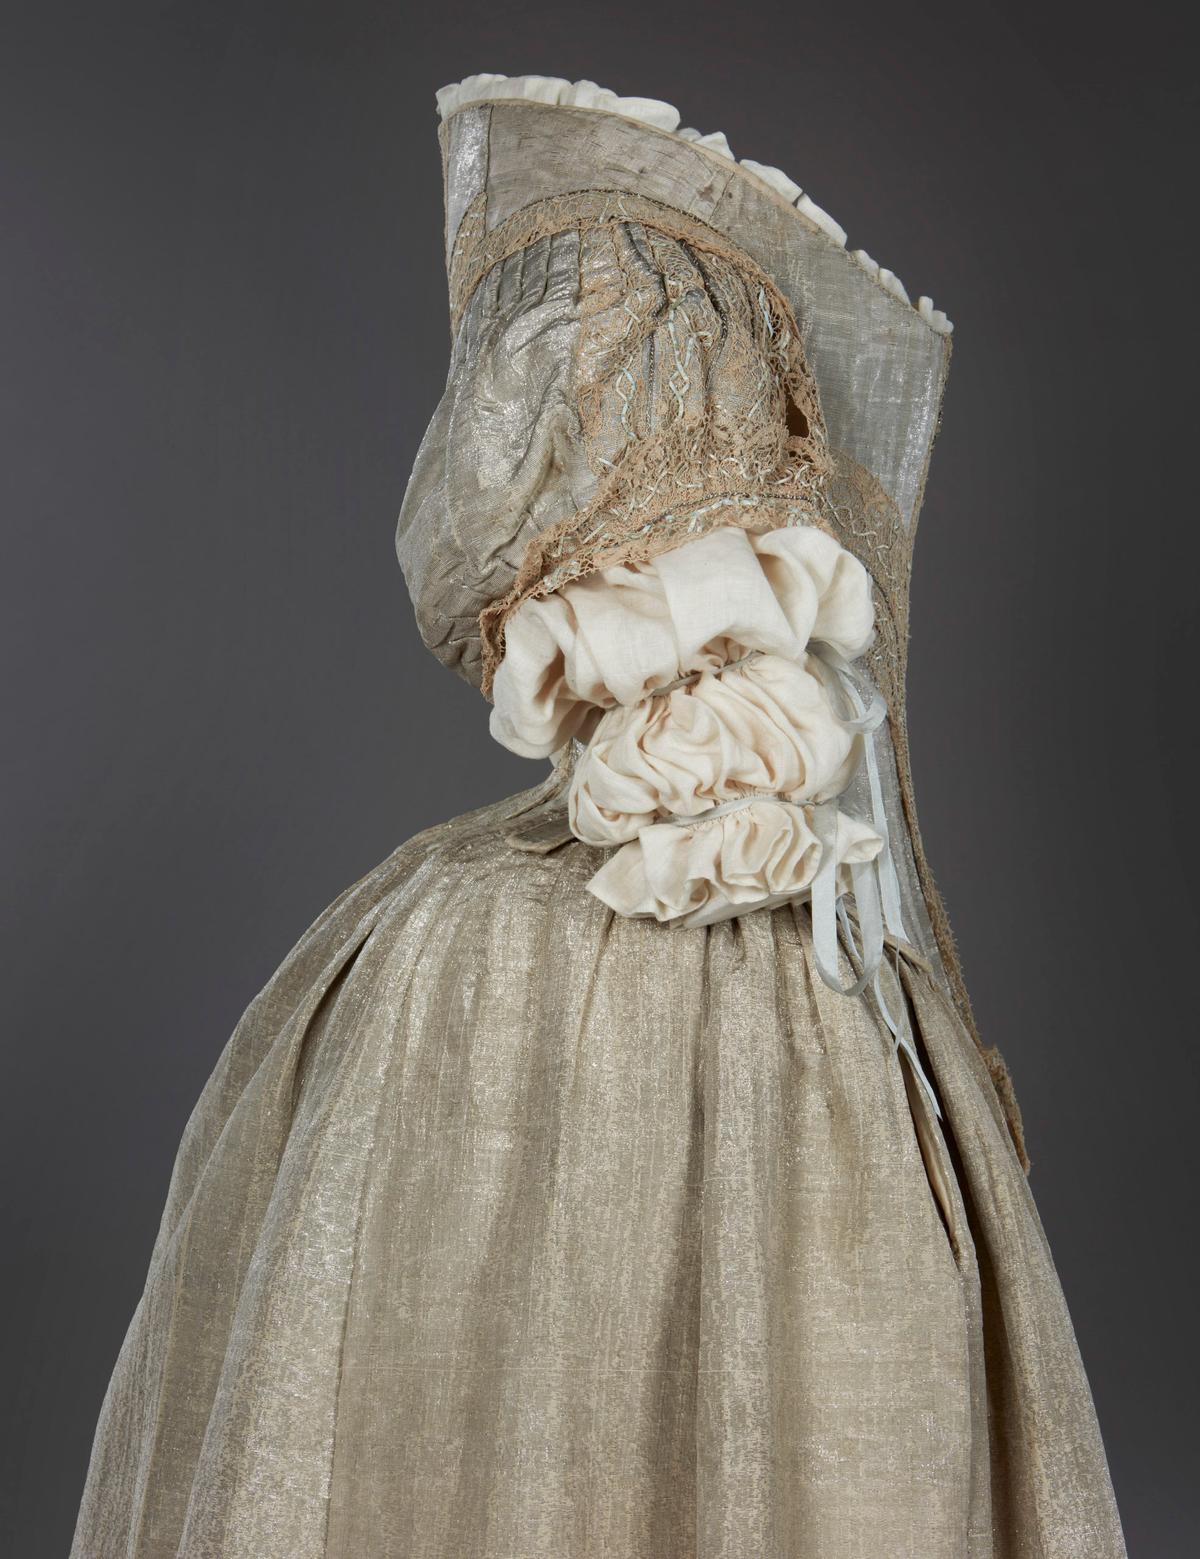 The Silver Tissue Dress is comprised of a whalebone bodice and skirt handmade from fine silk woven with real silver thread. (© Historic Royal Palaces / Fashion Museum Bath)